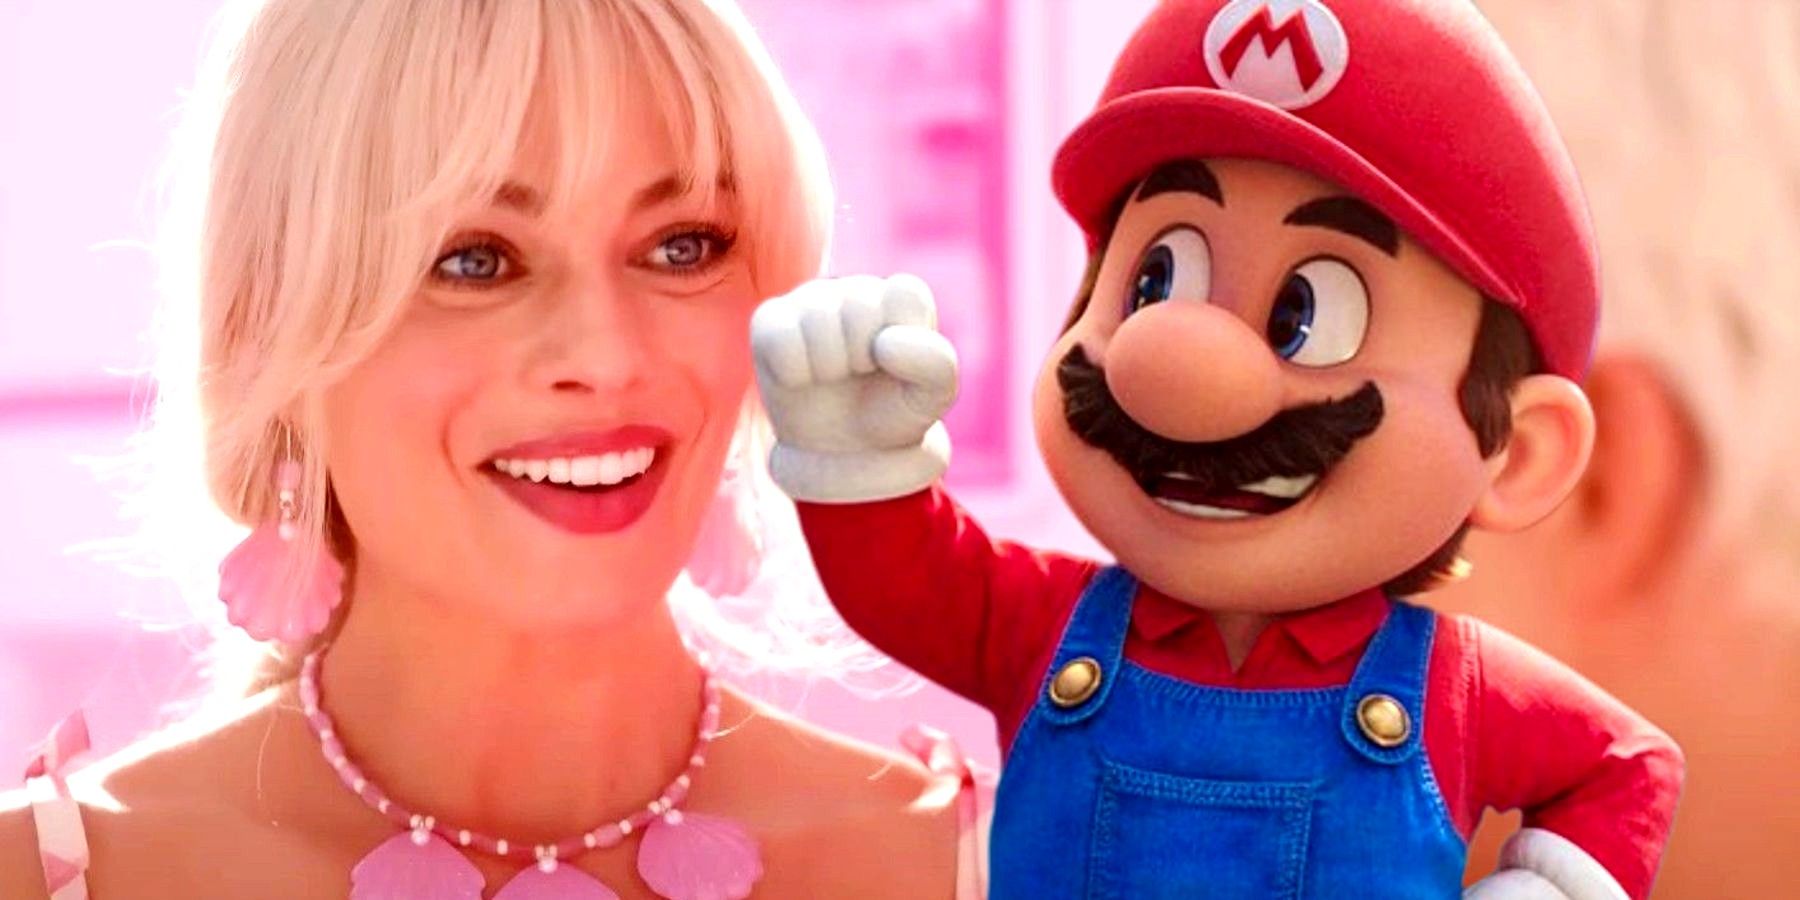 Custom image of Barbie and Mario smiling at each other